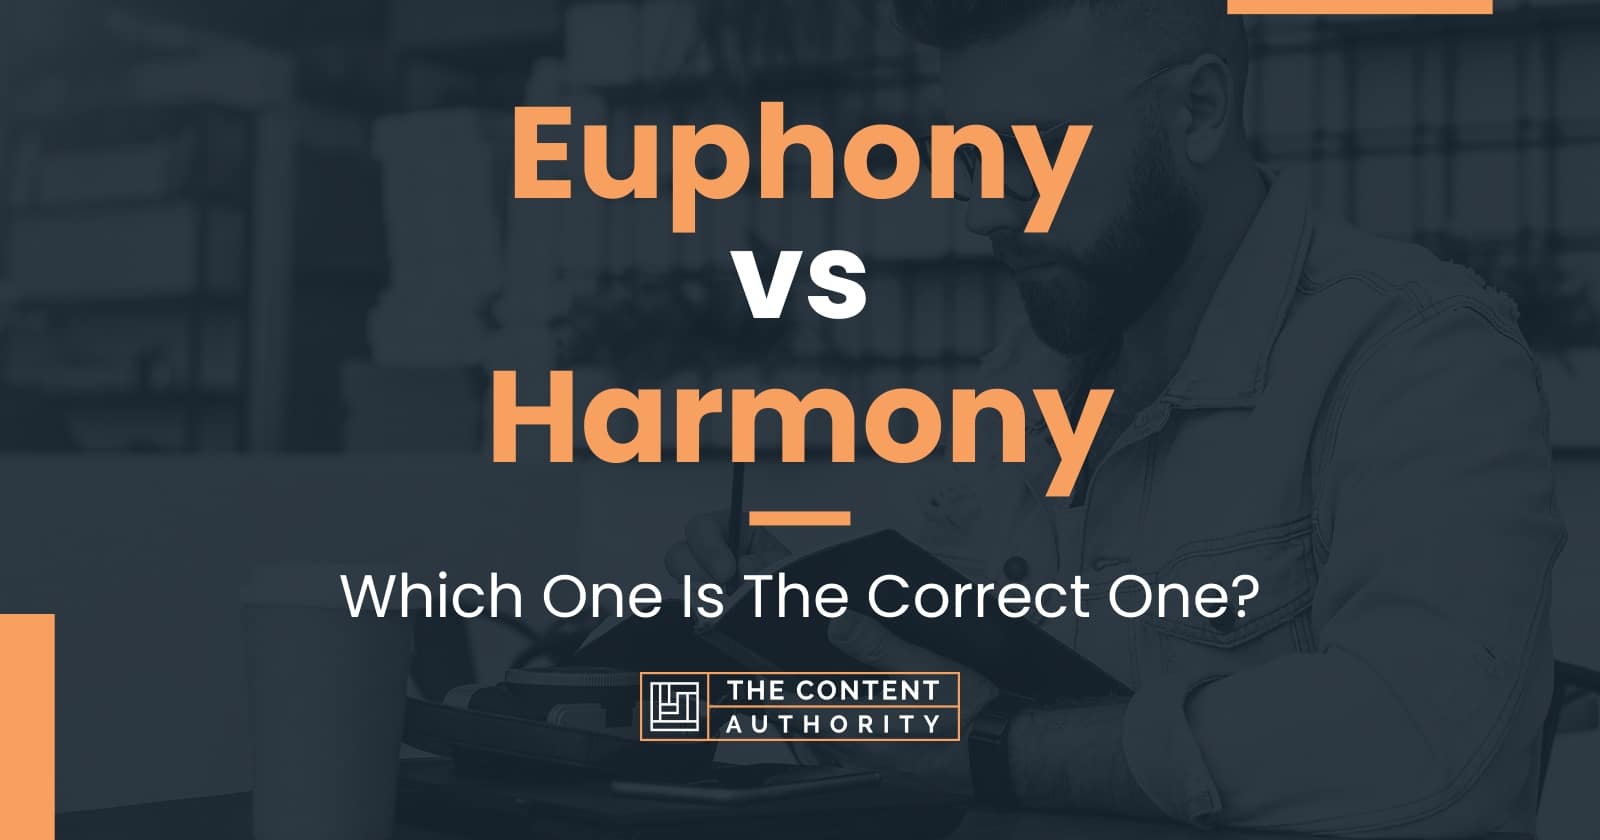 Euphony vs Harmony: Which One Is The Correct One?